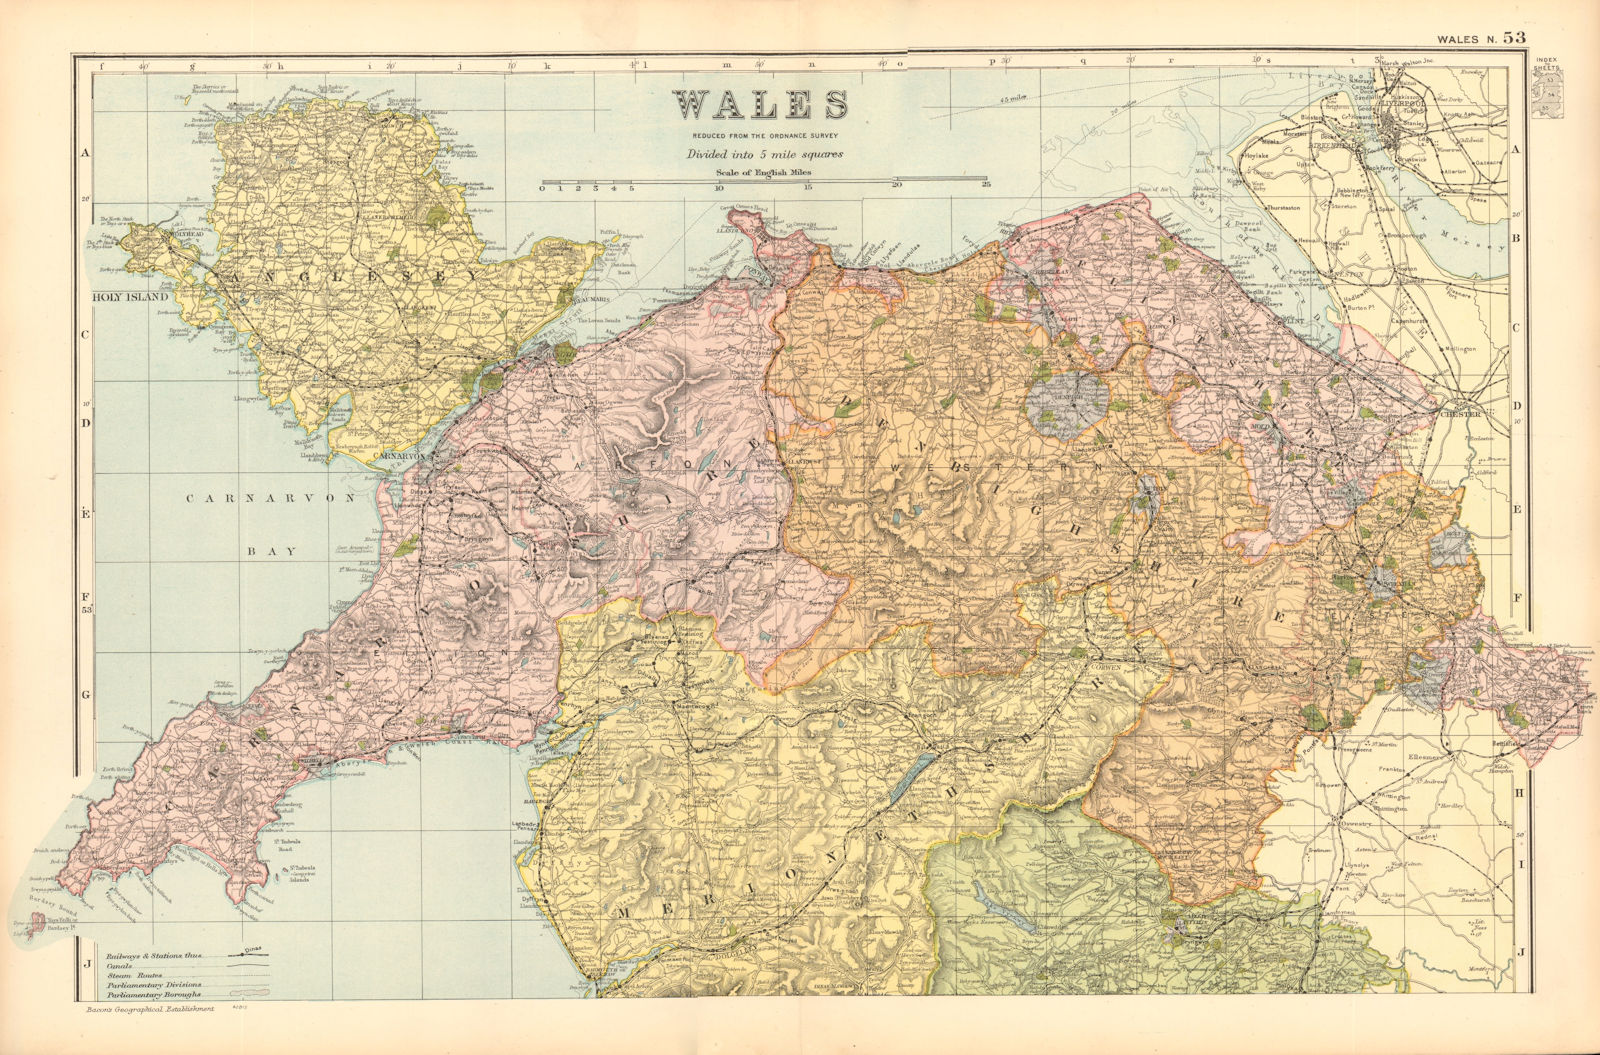 NORTH WALES. Showing Parliamentary divisions & boroughs. BACON 1904 old map